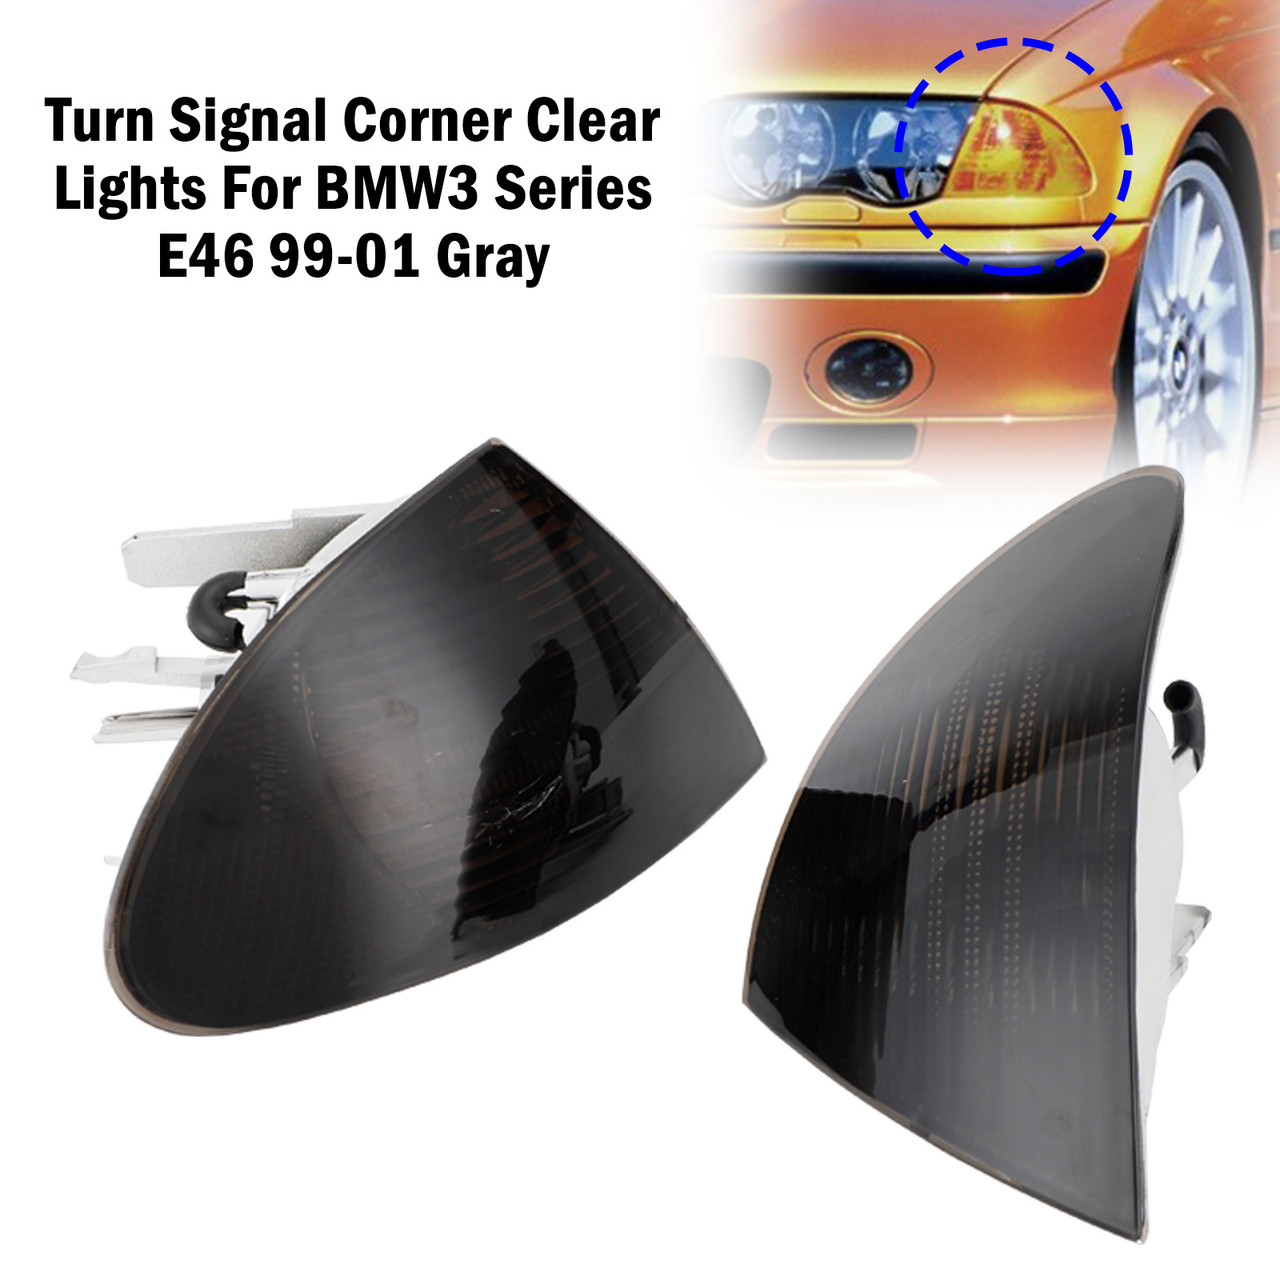 Turn Signal Corner Corner Clear Lights Fit For BMW 3 Series E46 99-01 Gray